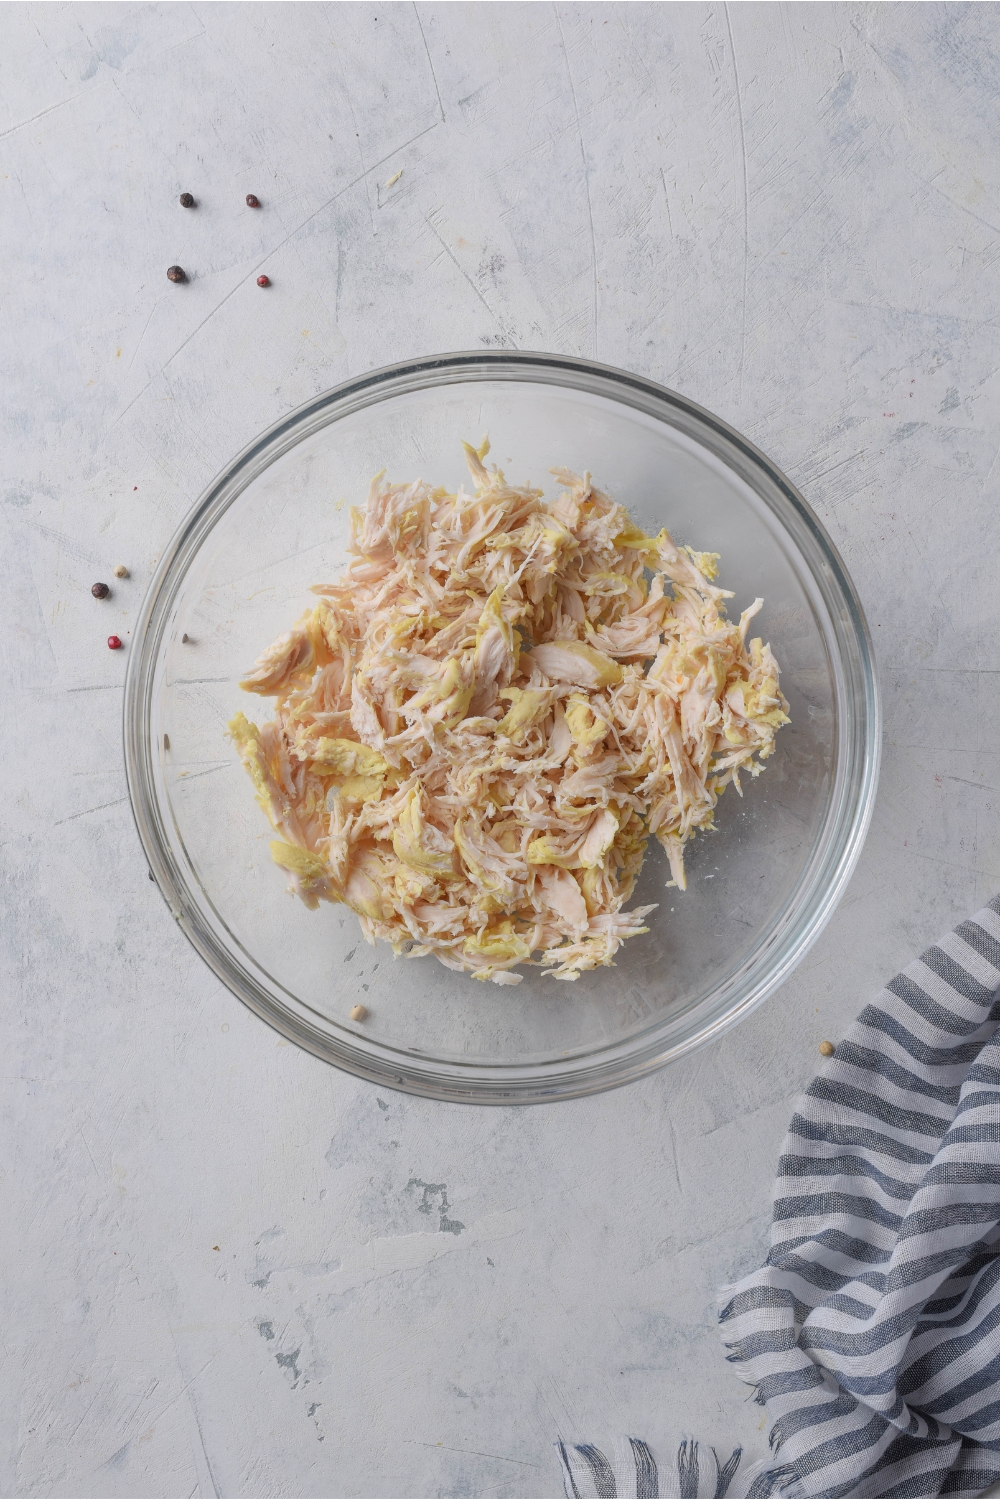 A clear bowl with shredded chicken and diced celery in it.